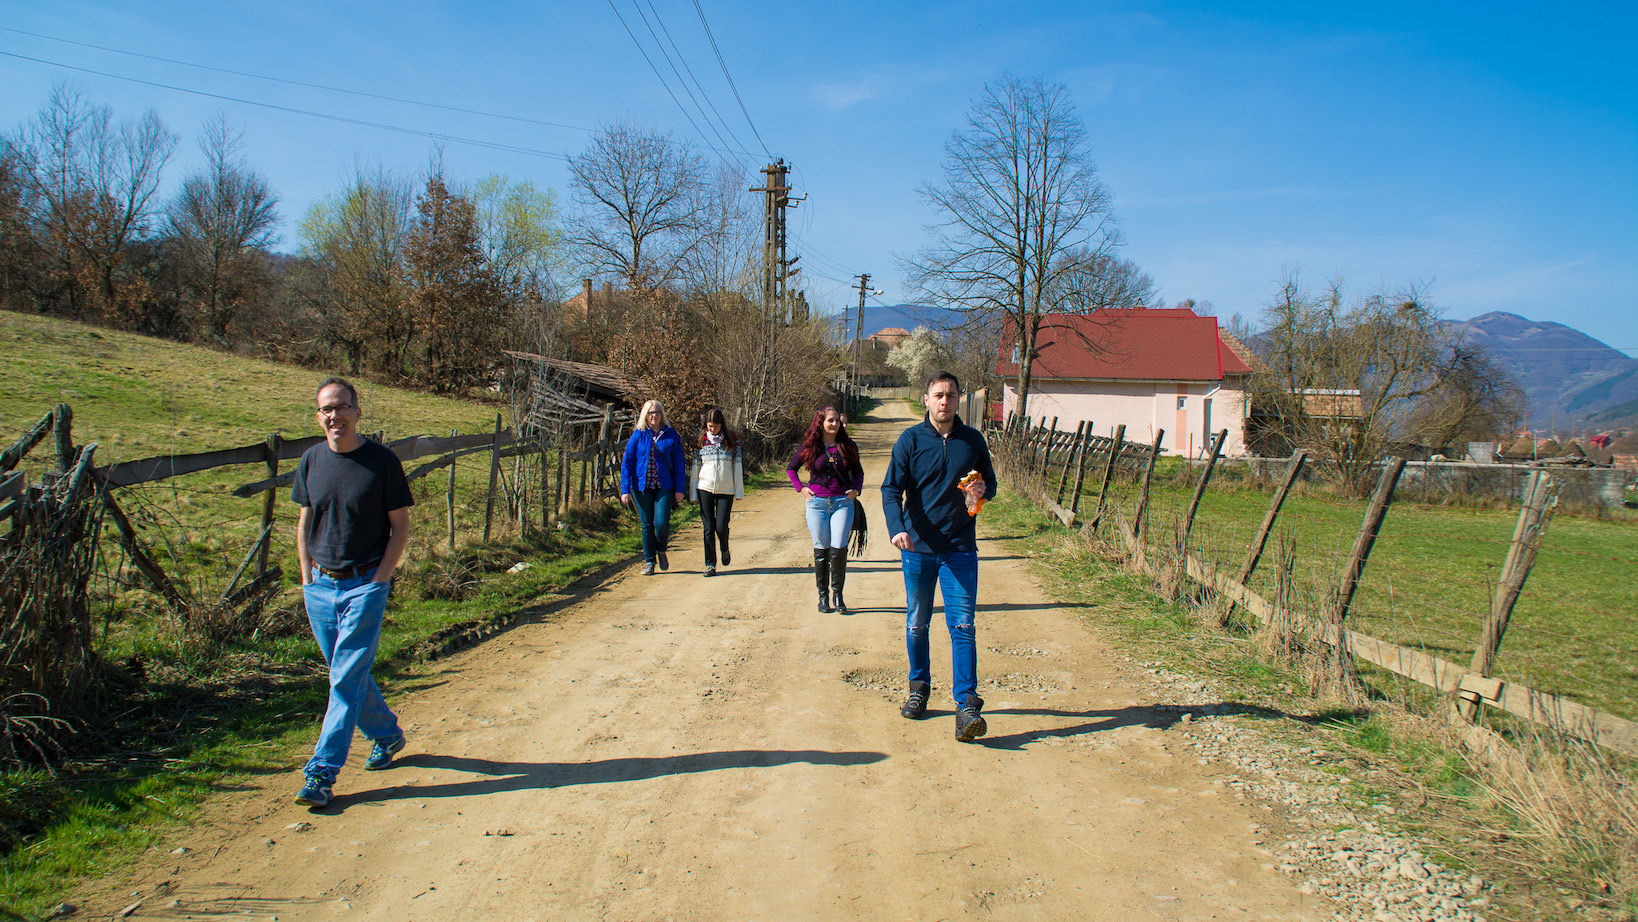 Visiting the countryside in Romania